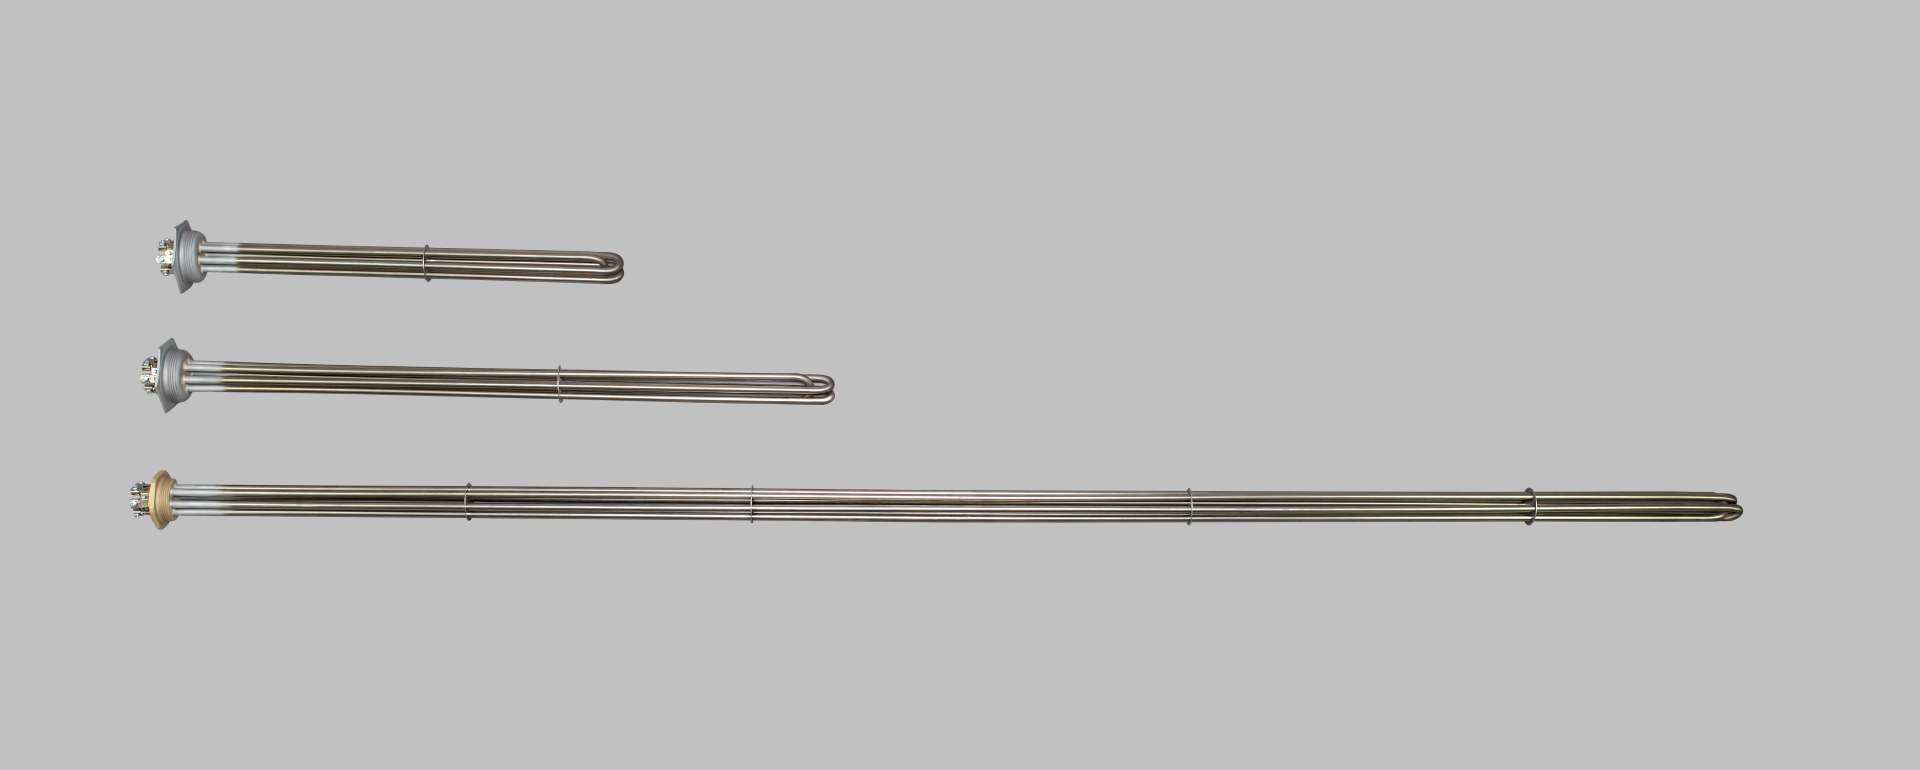 Heating elements dedicated to operate in oil or water furnace